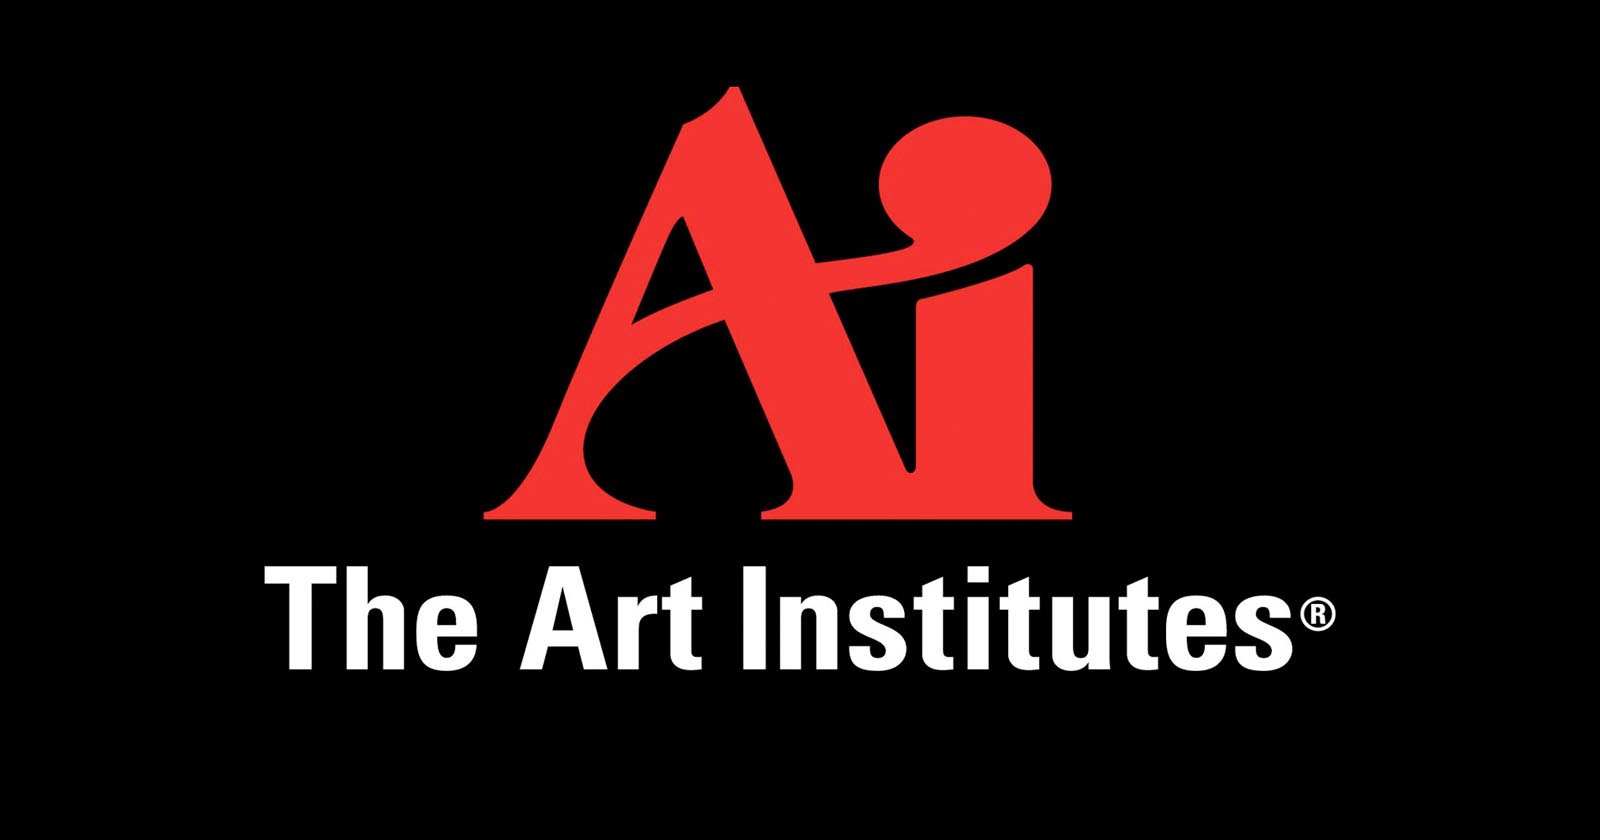 Biden Administration Forgives $6.1B in Loans to Former Art Institute Students